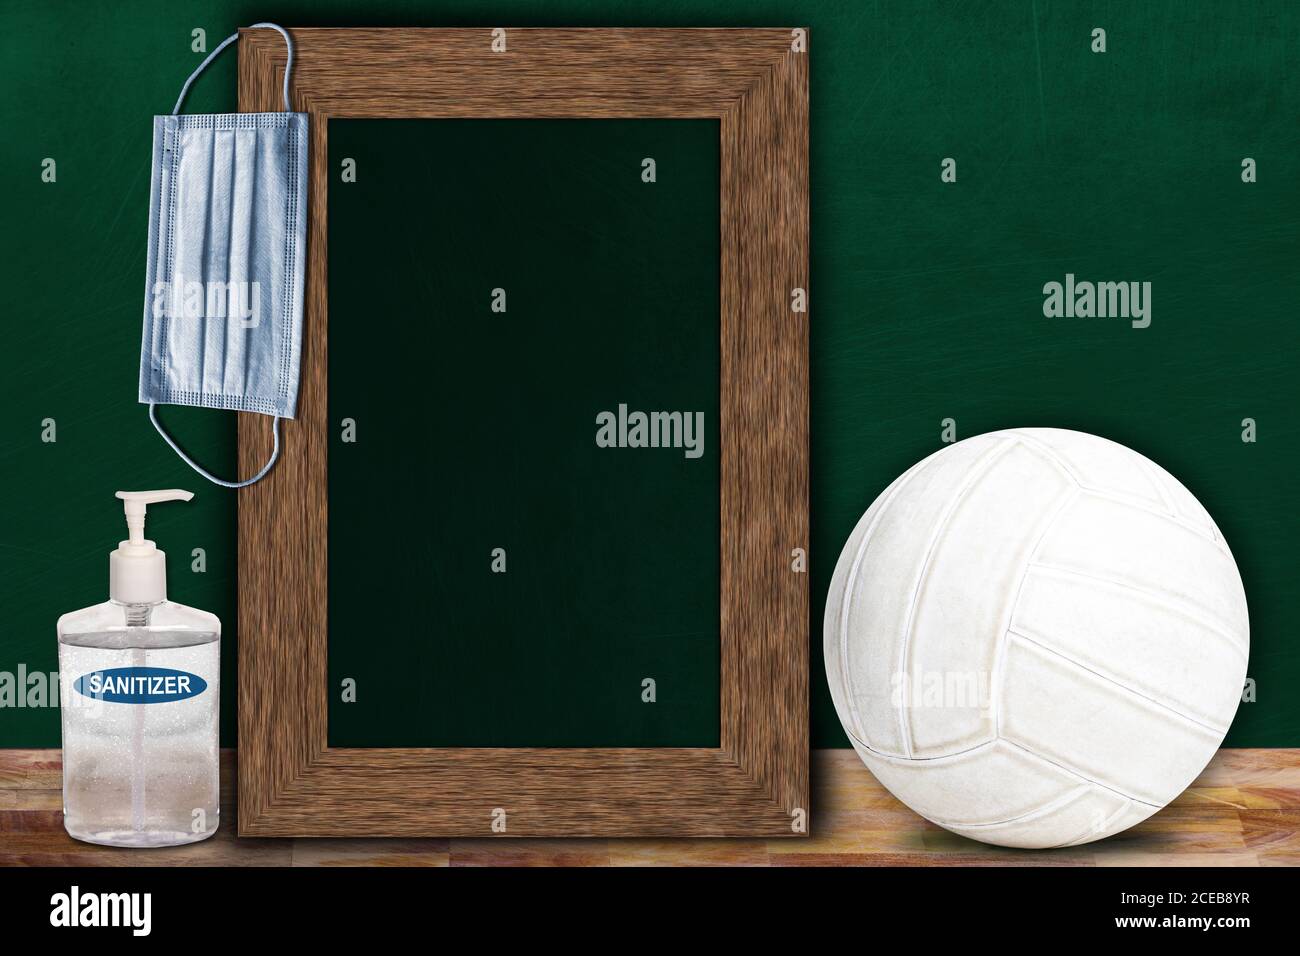 COVID-19 new normal sports concept in a classroom setting showing framed chalkboard with copy space and Volleyball on wooden table. Stock Photo